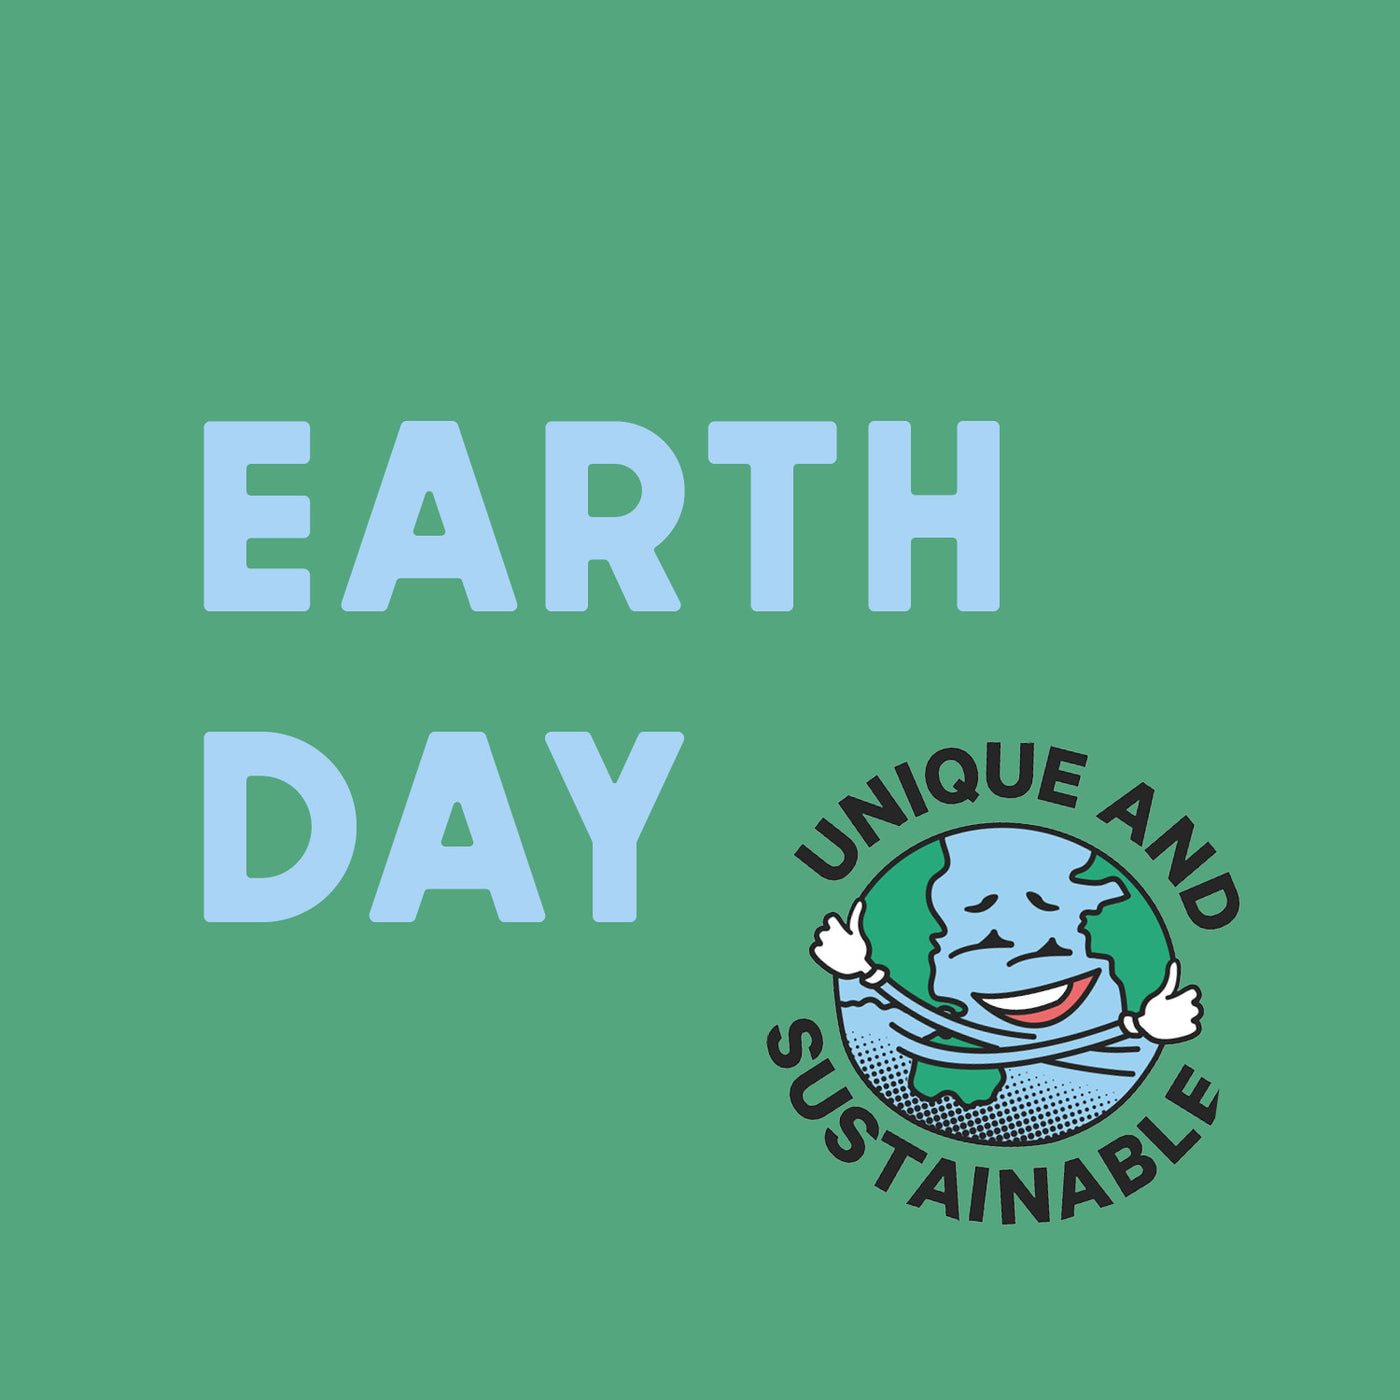 Celebrate Earth Day With Second Hand Shopping Tips